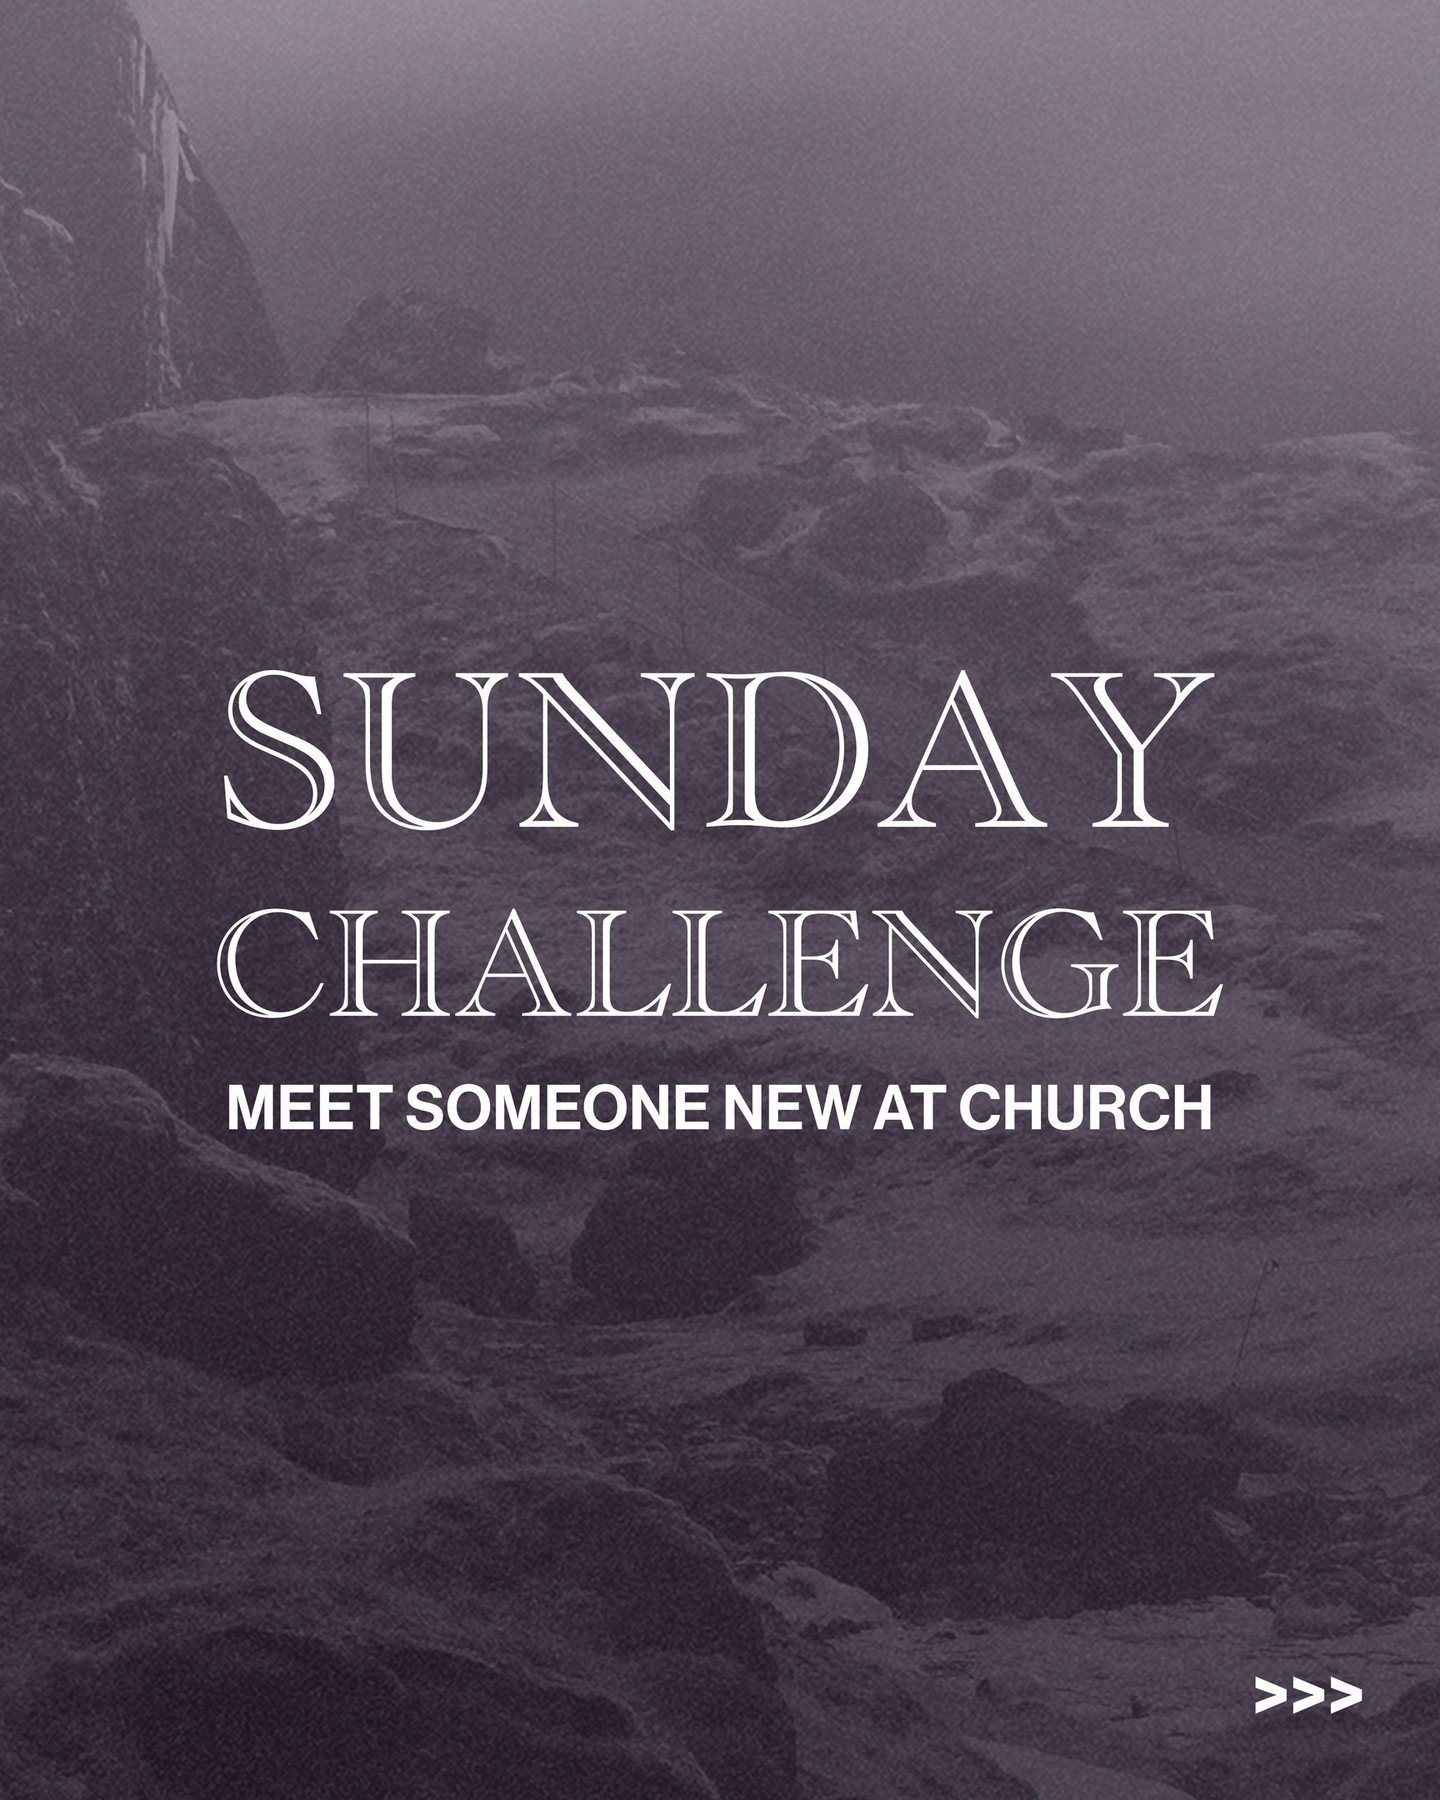 We want to challenge you to get out of your comfort zone and meet someone new at church this weekend! Here are some ways to start a conversation!